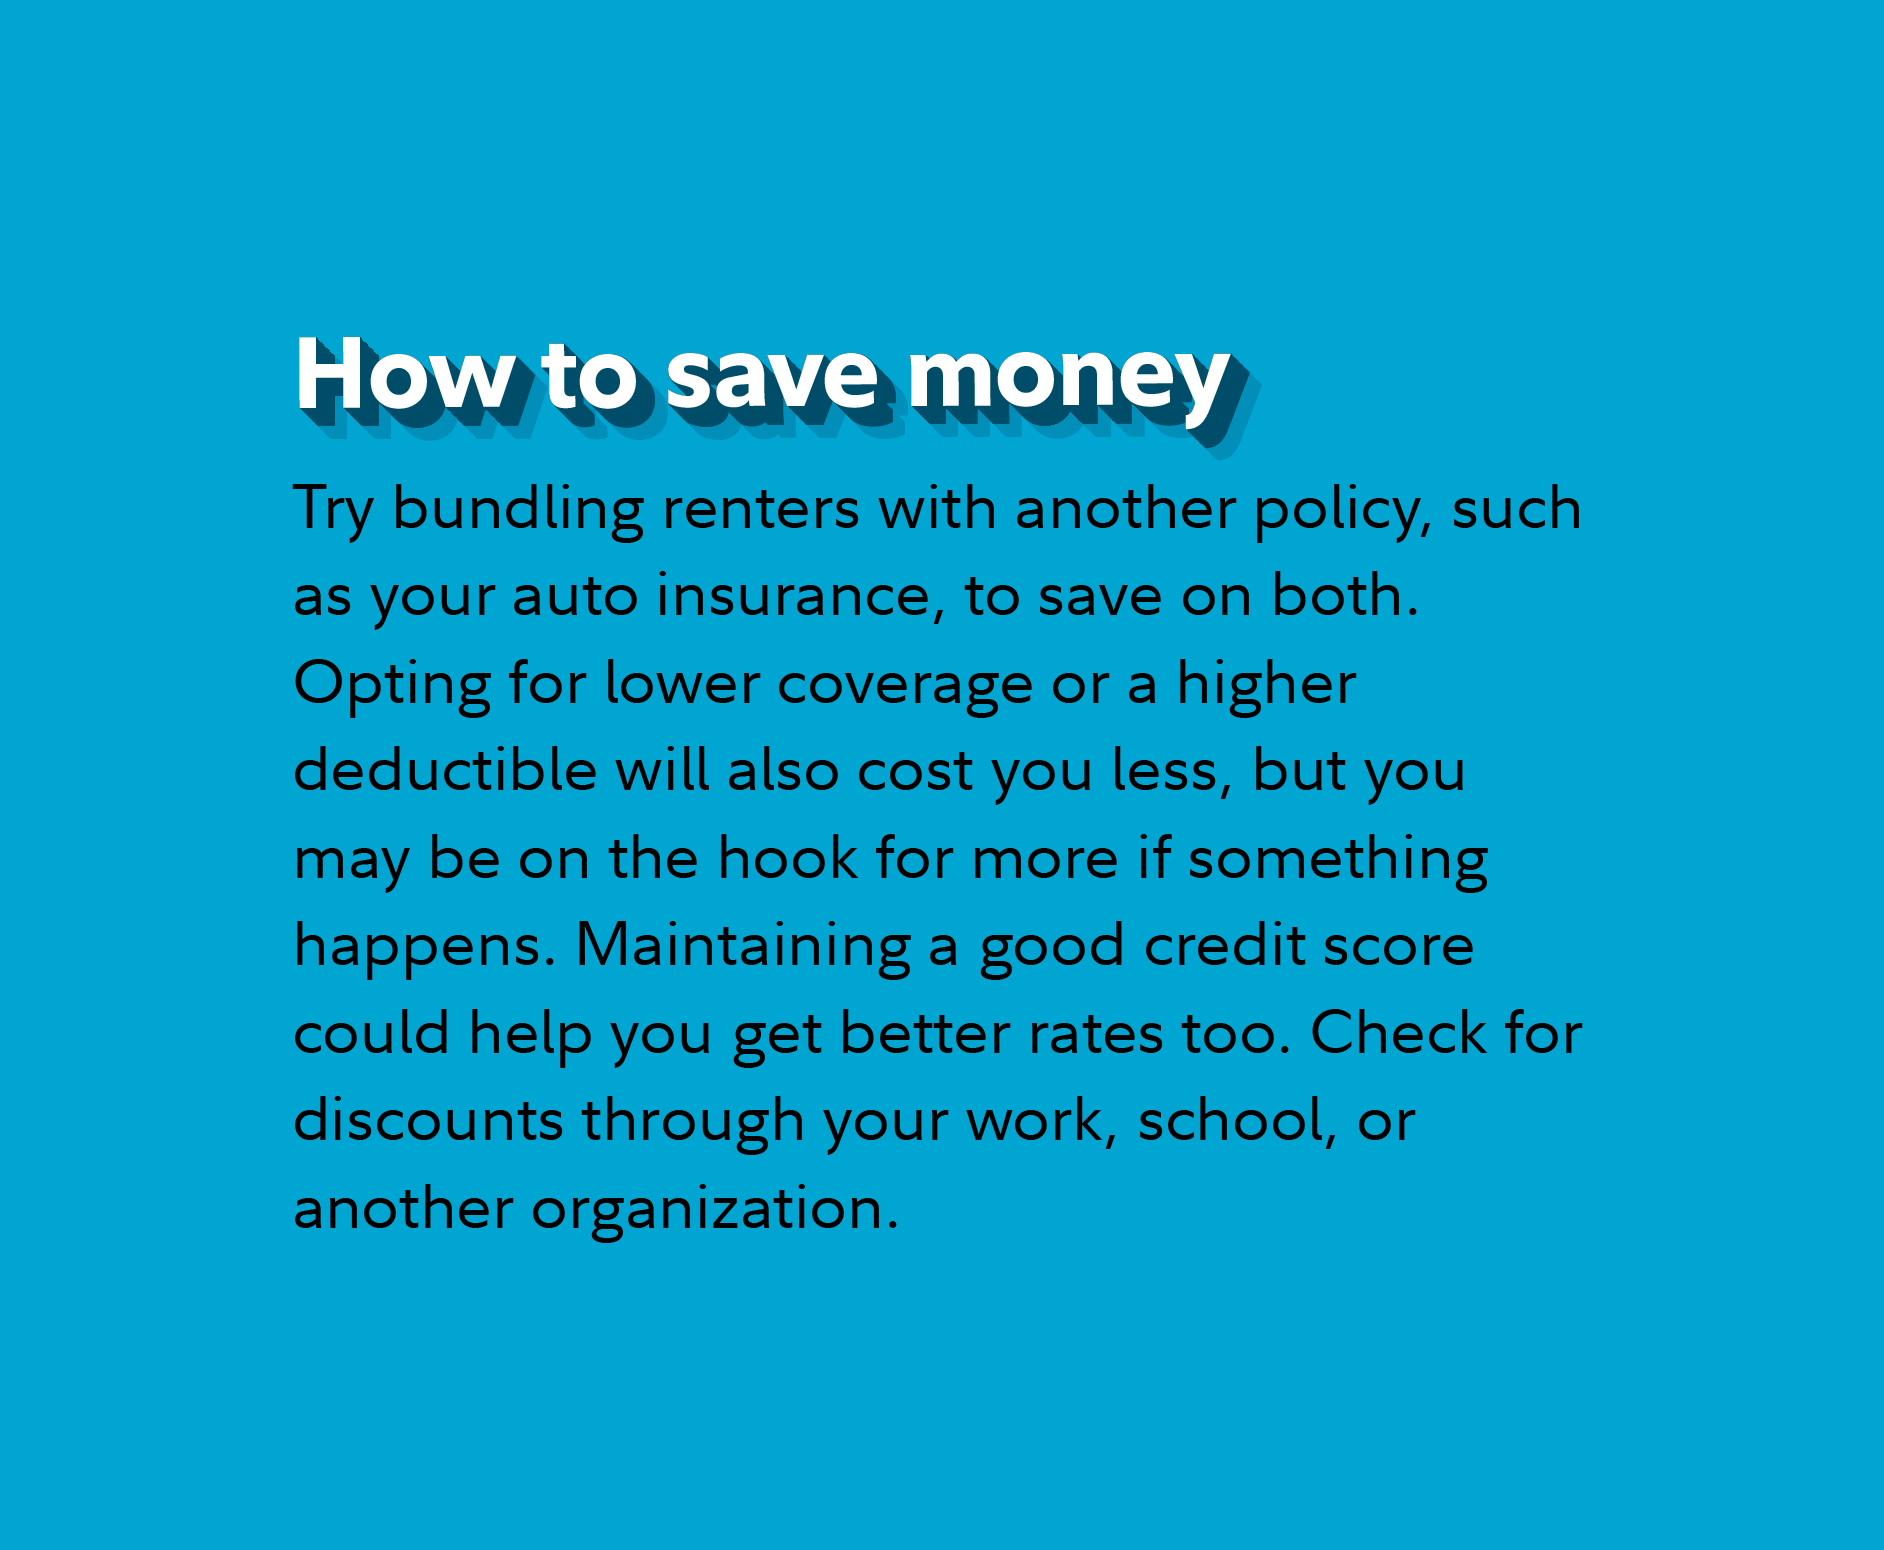 How to save money Try bundling renters with another policy, such as your auto insurance, to save on both. Opting for lower coverage or a higher deductible will also cost you less, but you may be on the hook for more if something happens. Maintaining a good credit score could help you get better rates too. Check for discounts through your work, school, or another organization. 